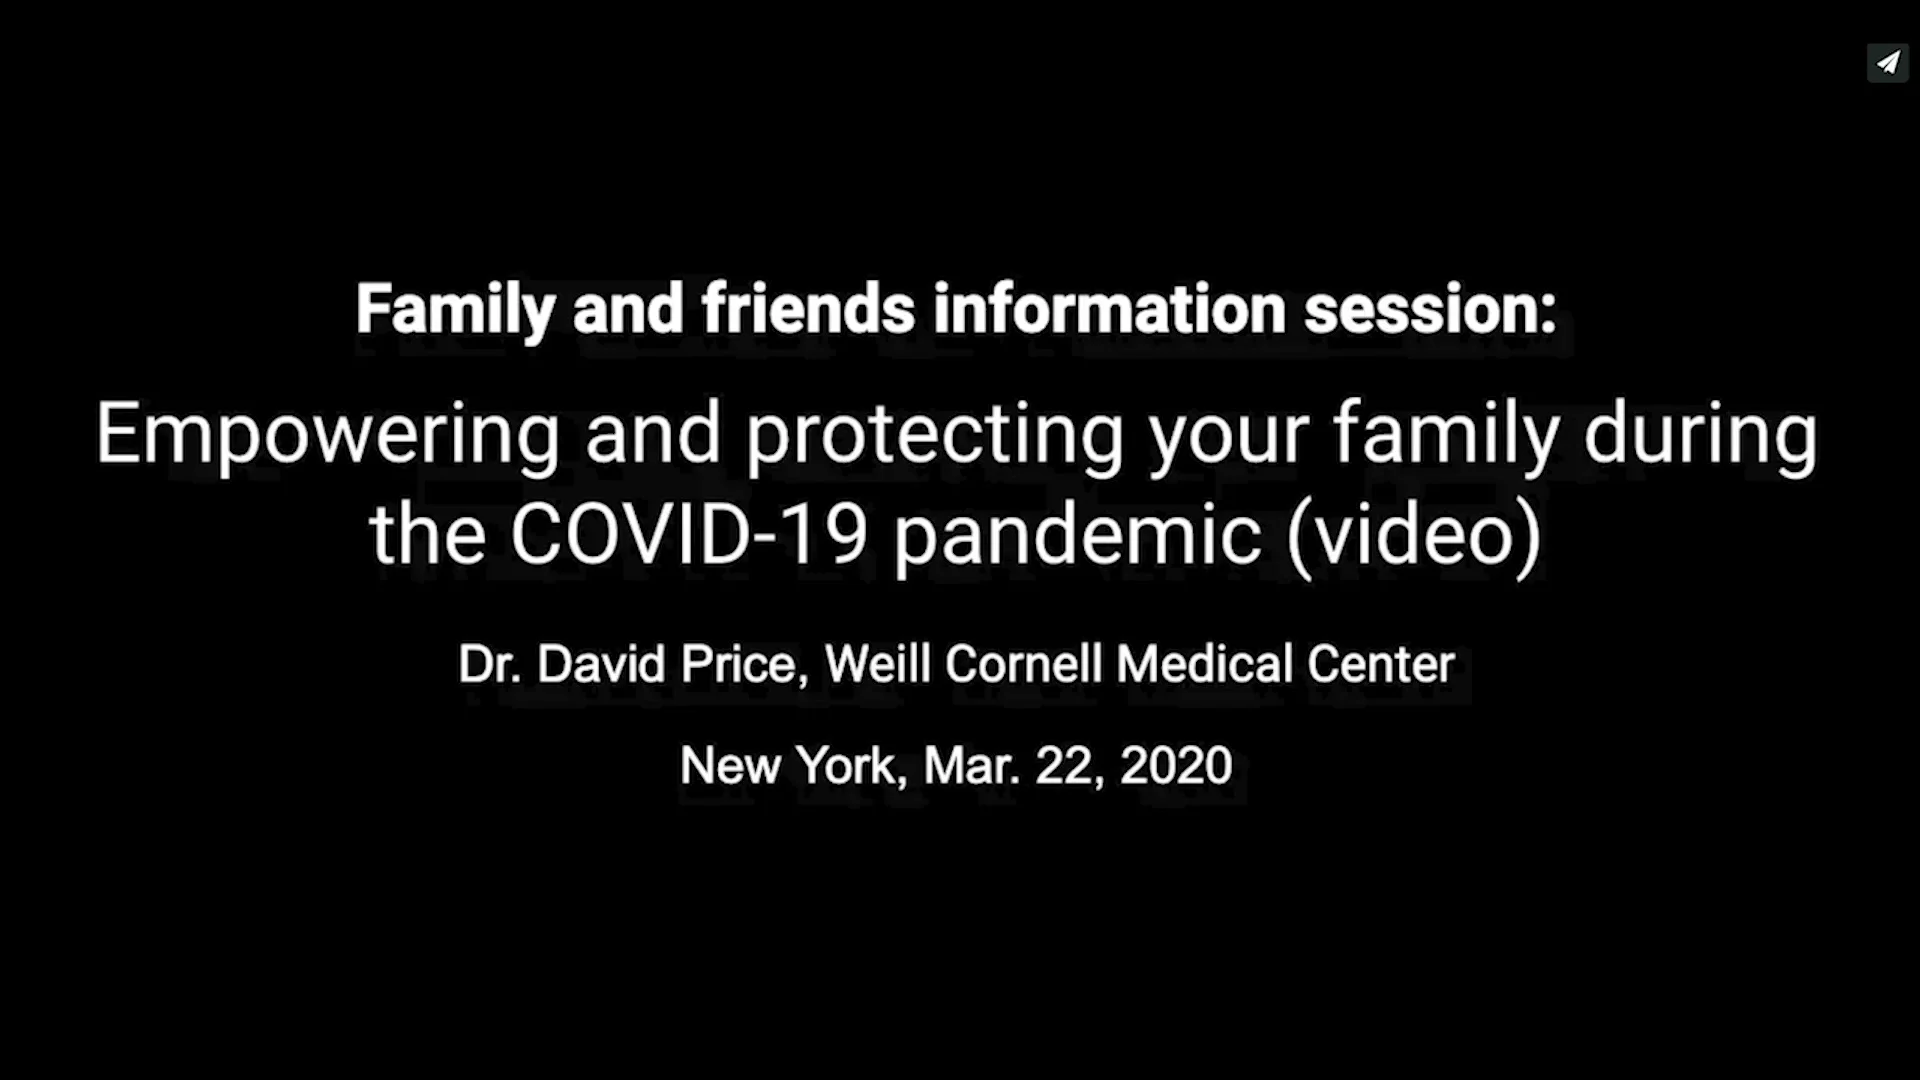 COVID-19: Protecting Your Family by Dr. Dave Price on Vimeo